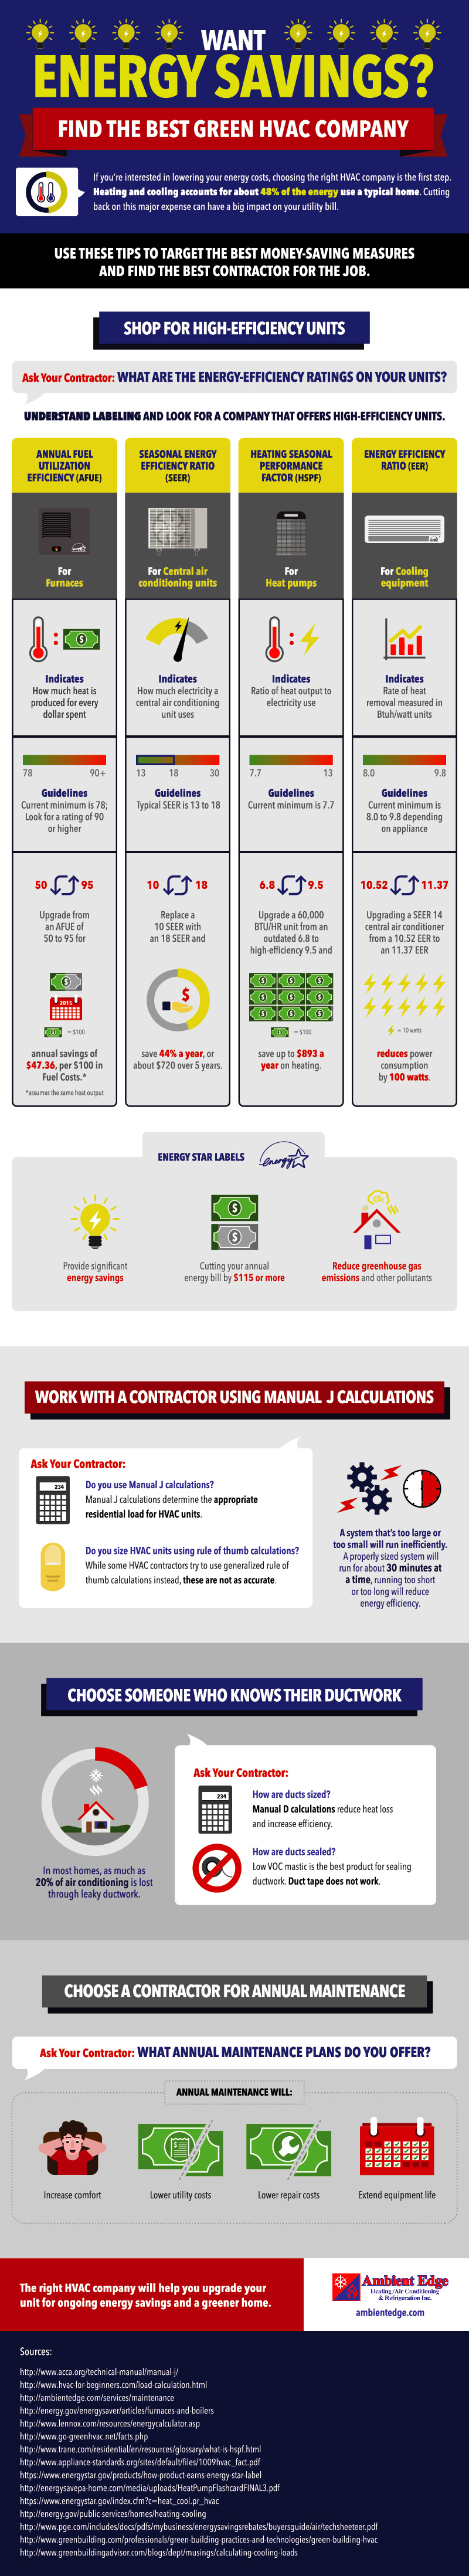 energy savings and Green HVAC contractor infographic